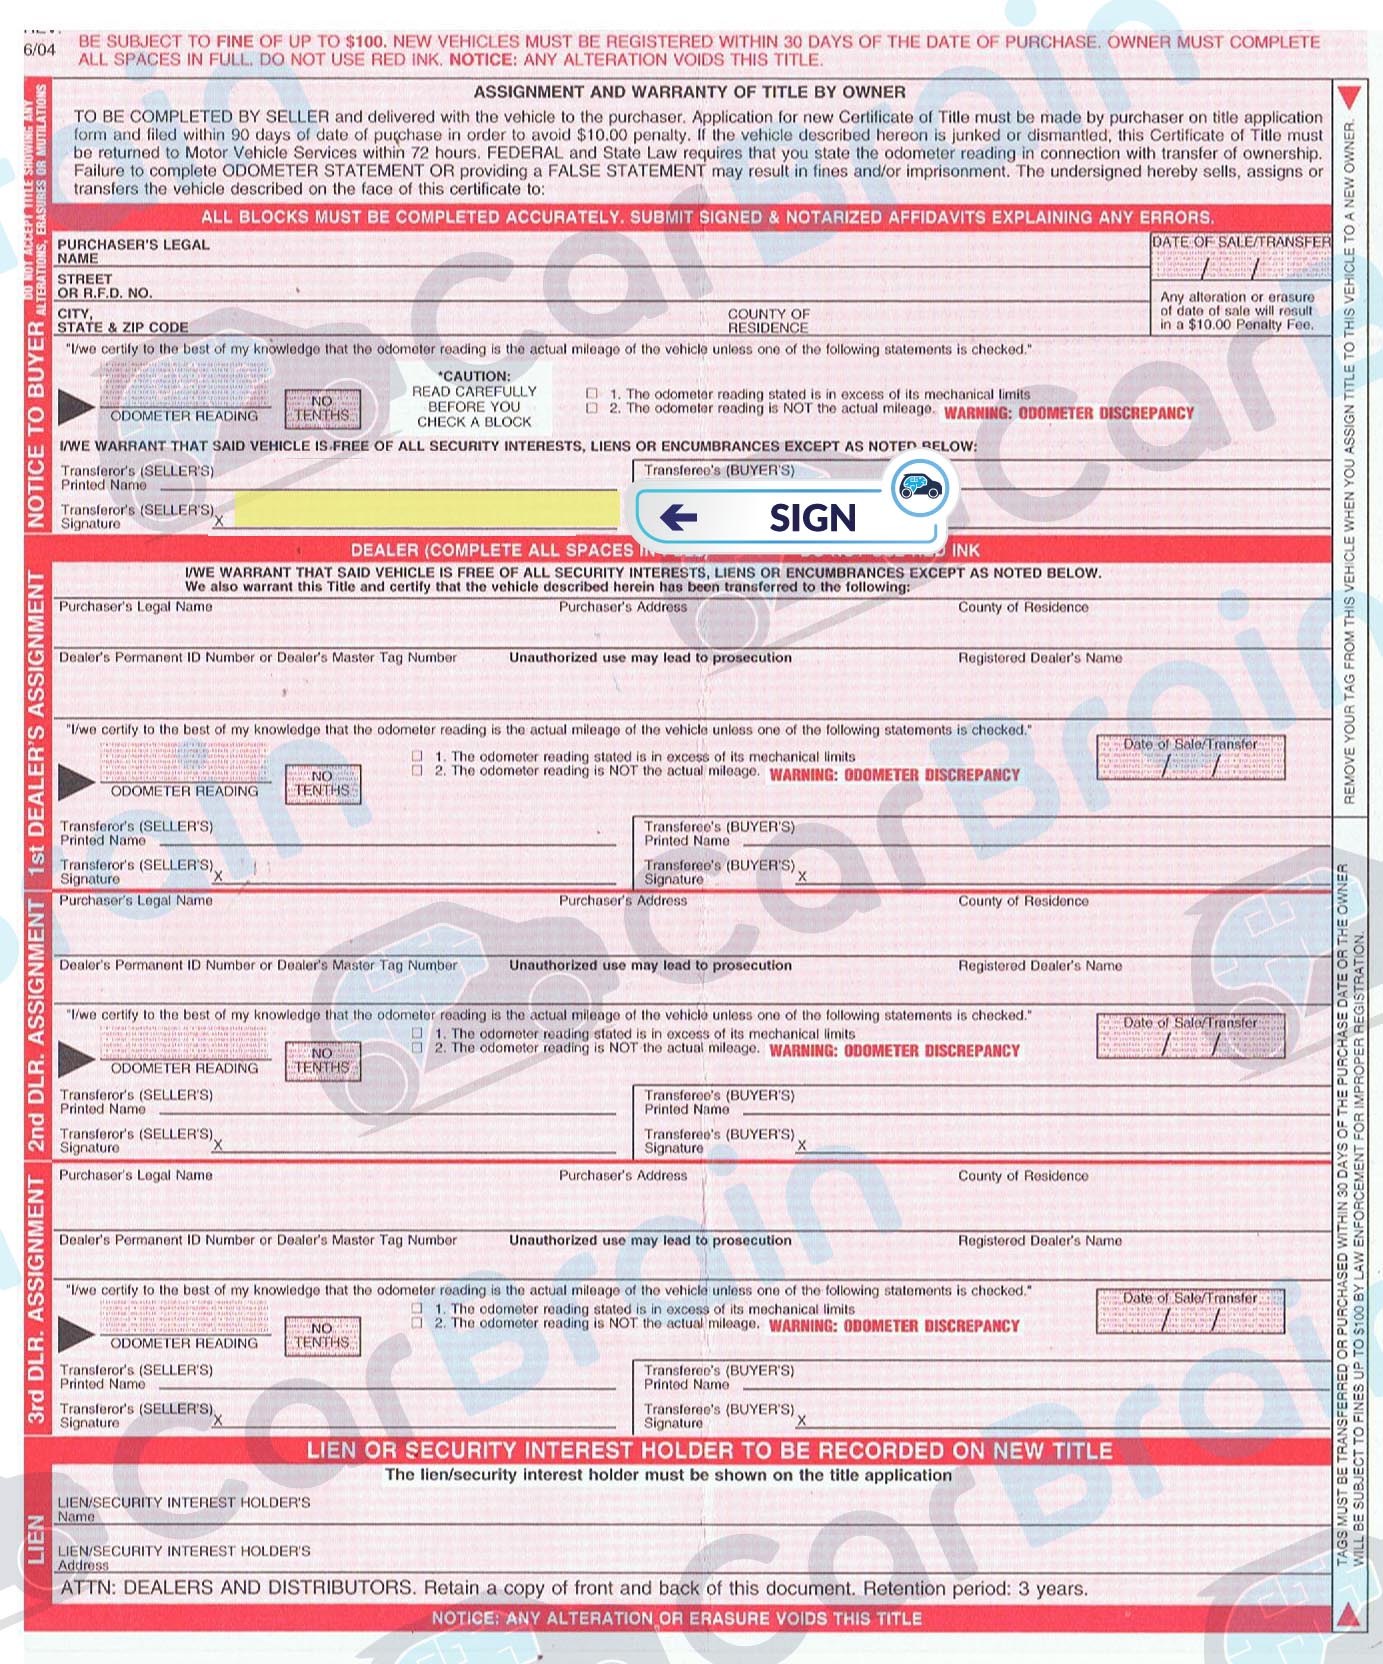 Car Title Transfer Guide. Sell a Car in Fast